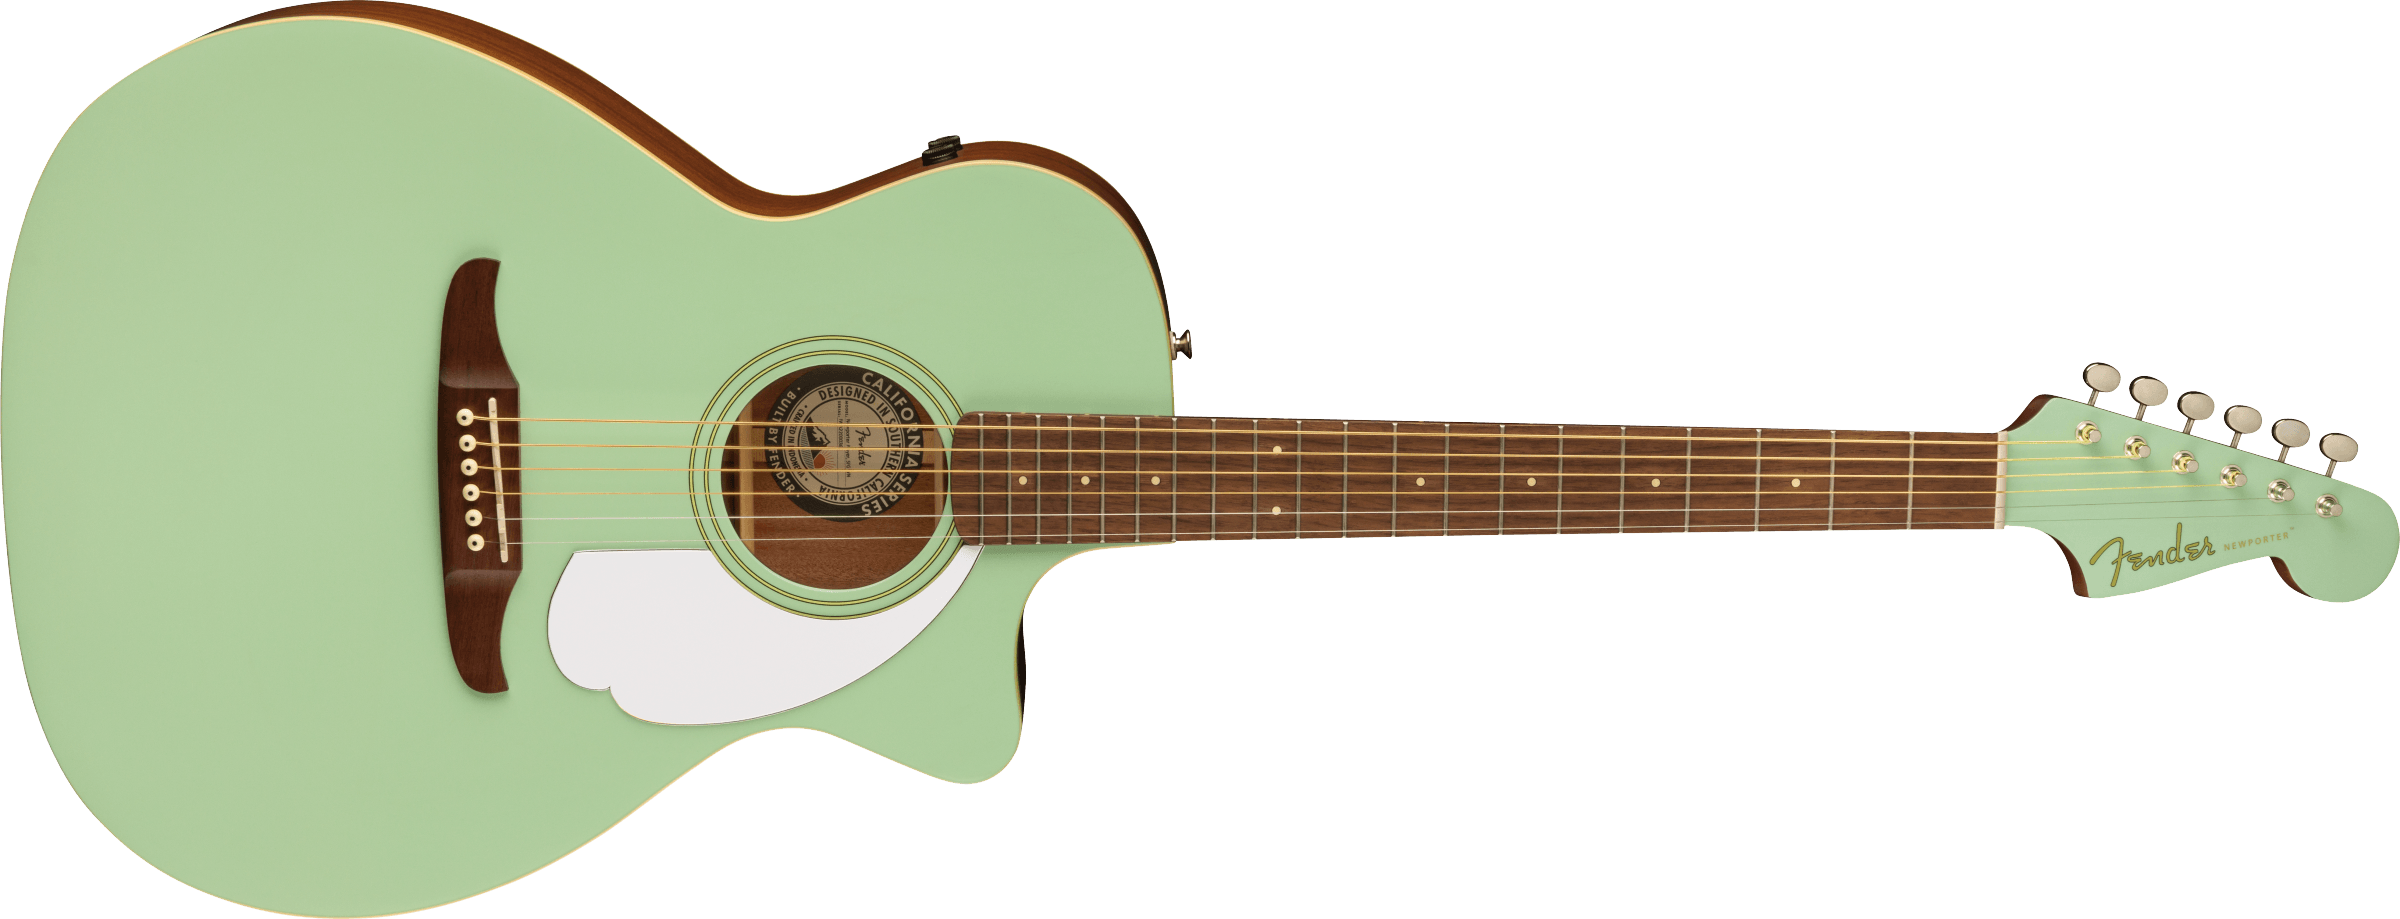 Fender Newport Player Cw Epicea Sapelle - Surf Green - Electro acoustic guitar - Variation 2